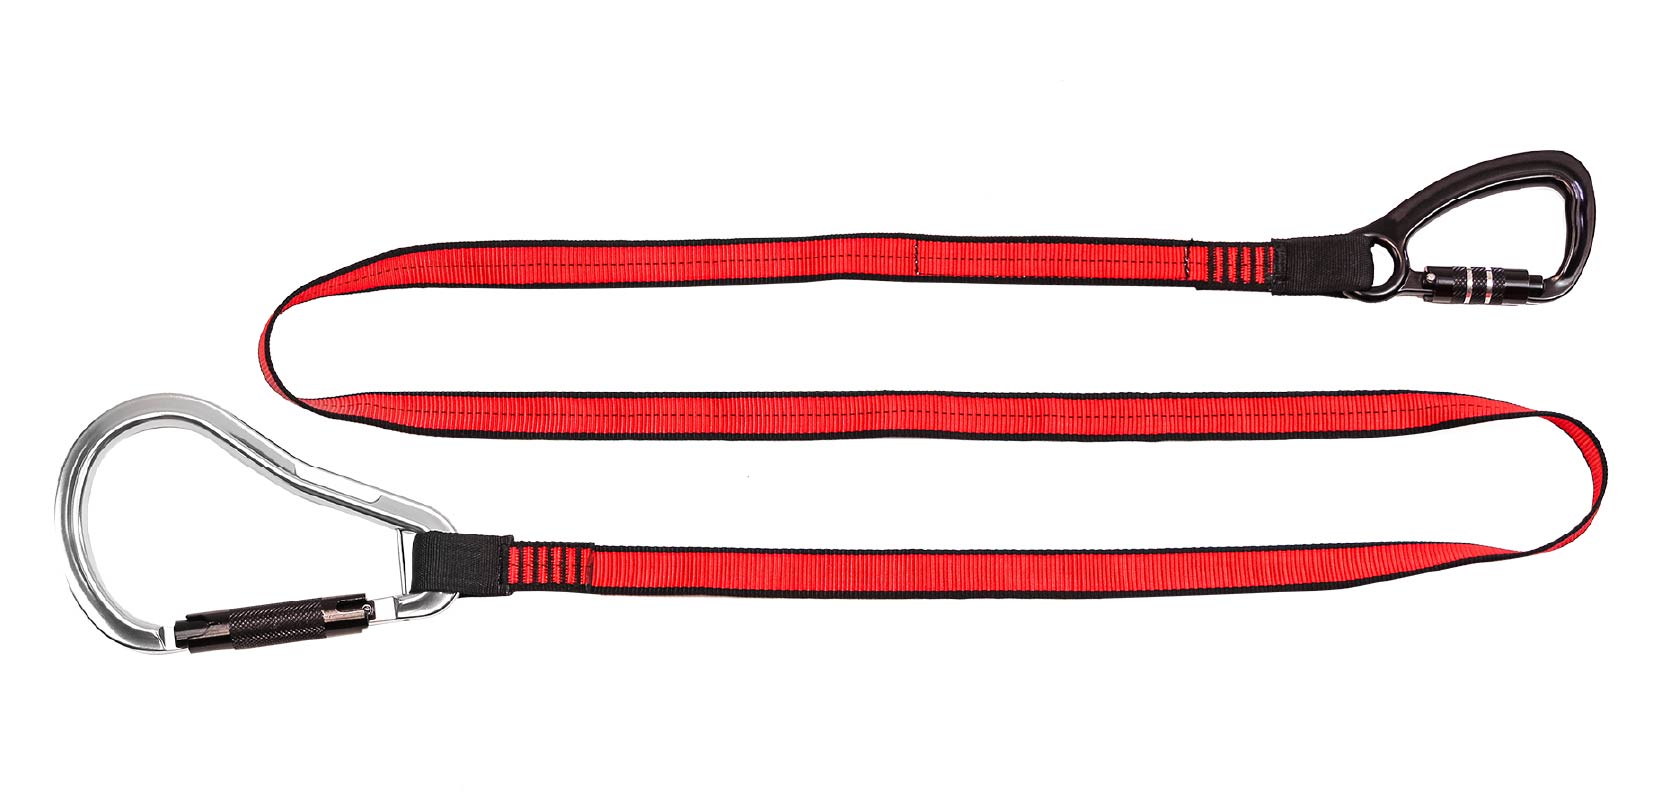 Podger / Tool Lanyard – Grip Support Store